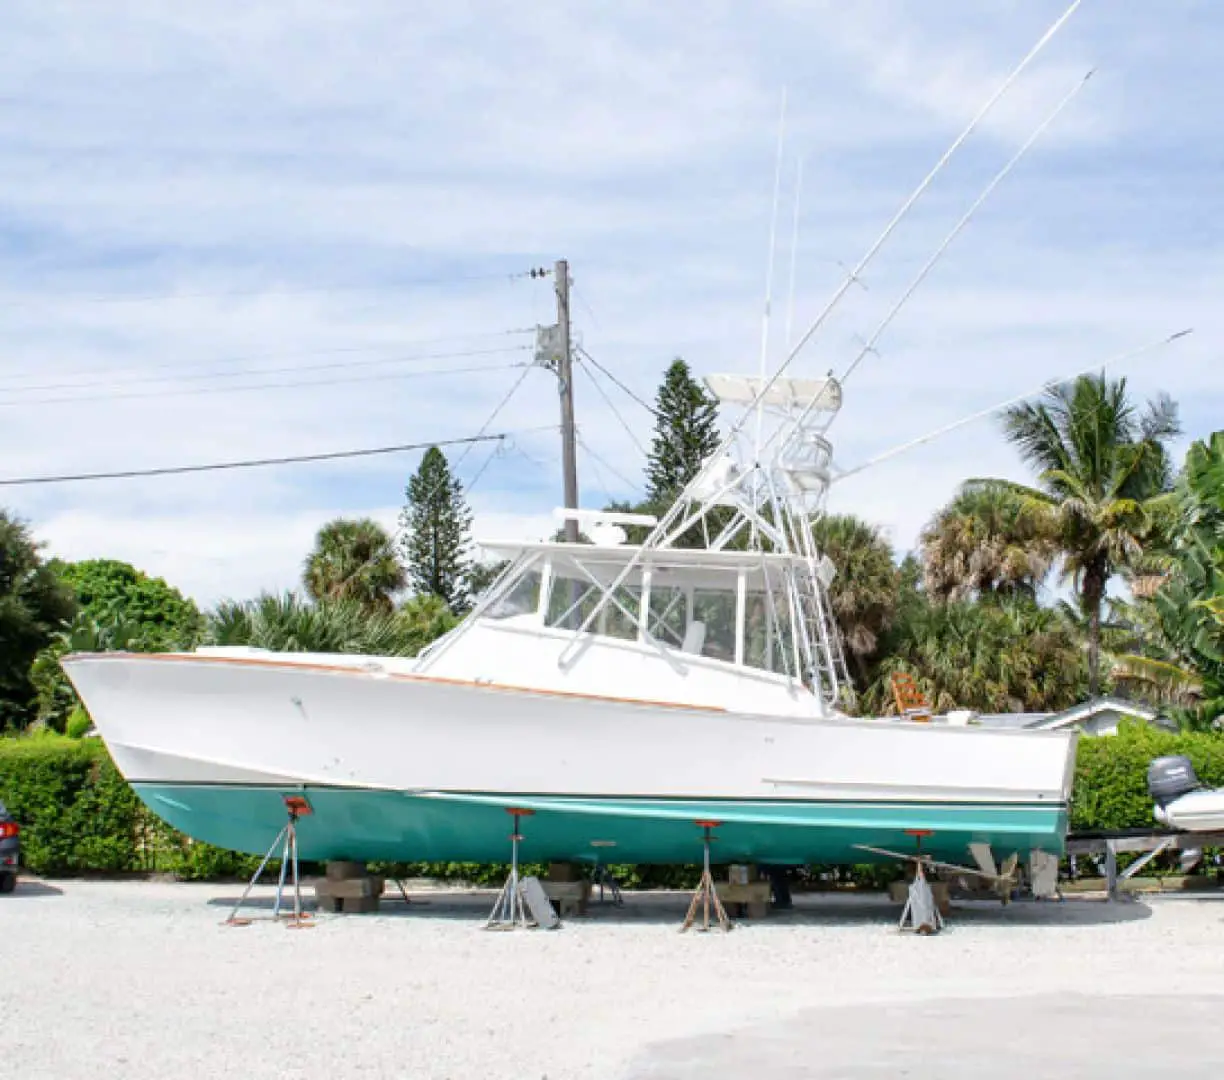 1986 Used Knowles 40 Custom Express Saltwater Fishing Boat For Sale ...